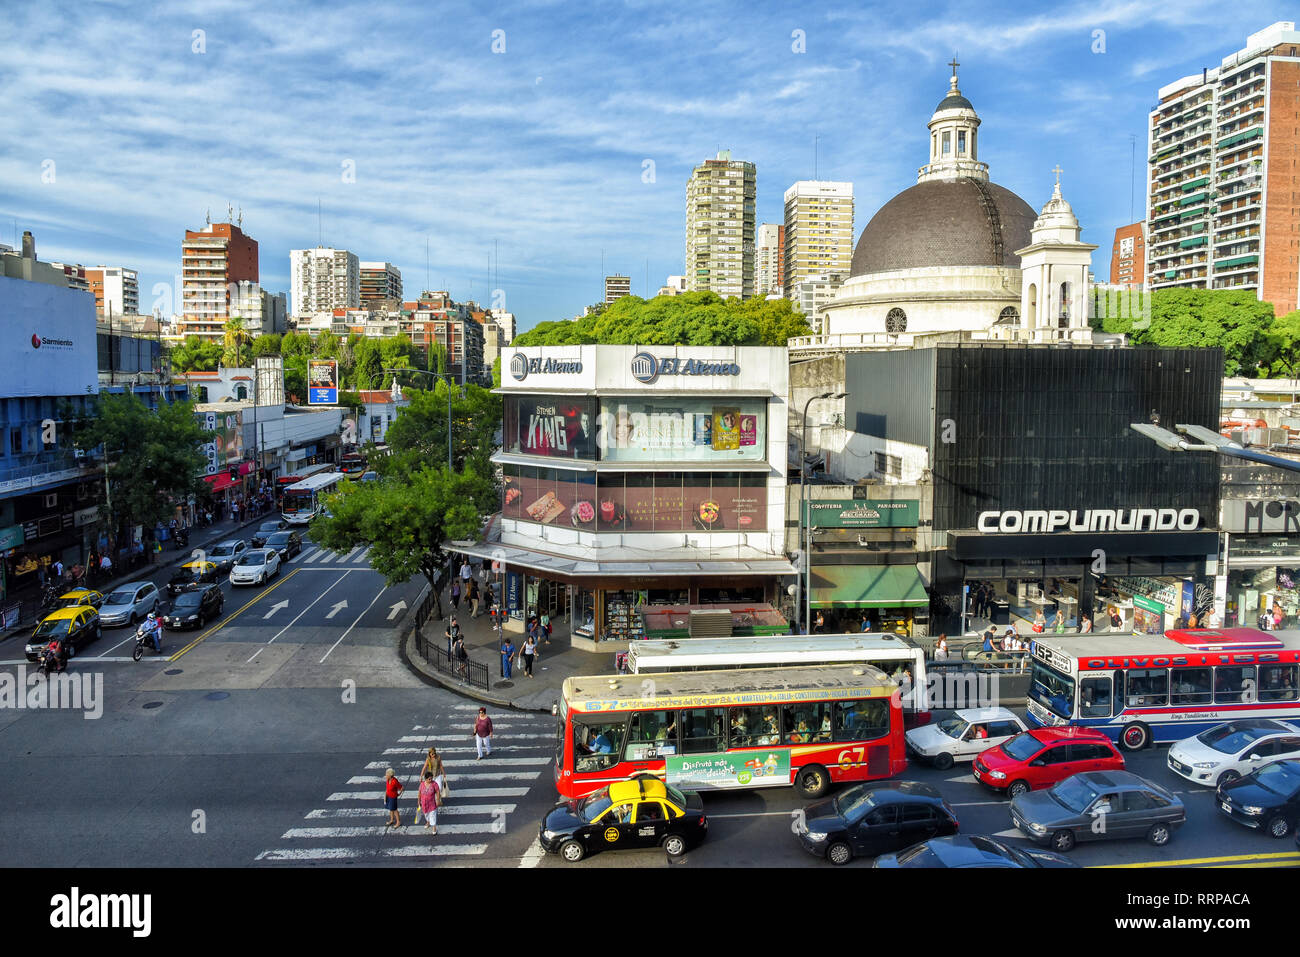 Buenos Aires, Argentina - 17 Mar, 2016: Aerial daytime view of the Cabildo Avenue and dome of the Parish of the Immaculate Conception with traffic. Stock Photo